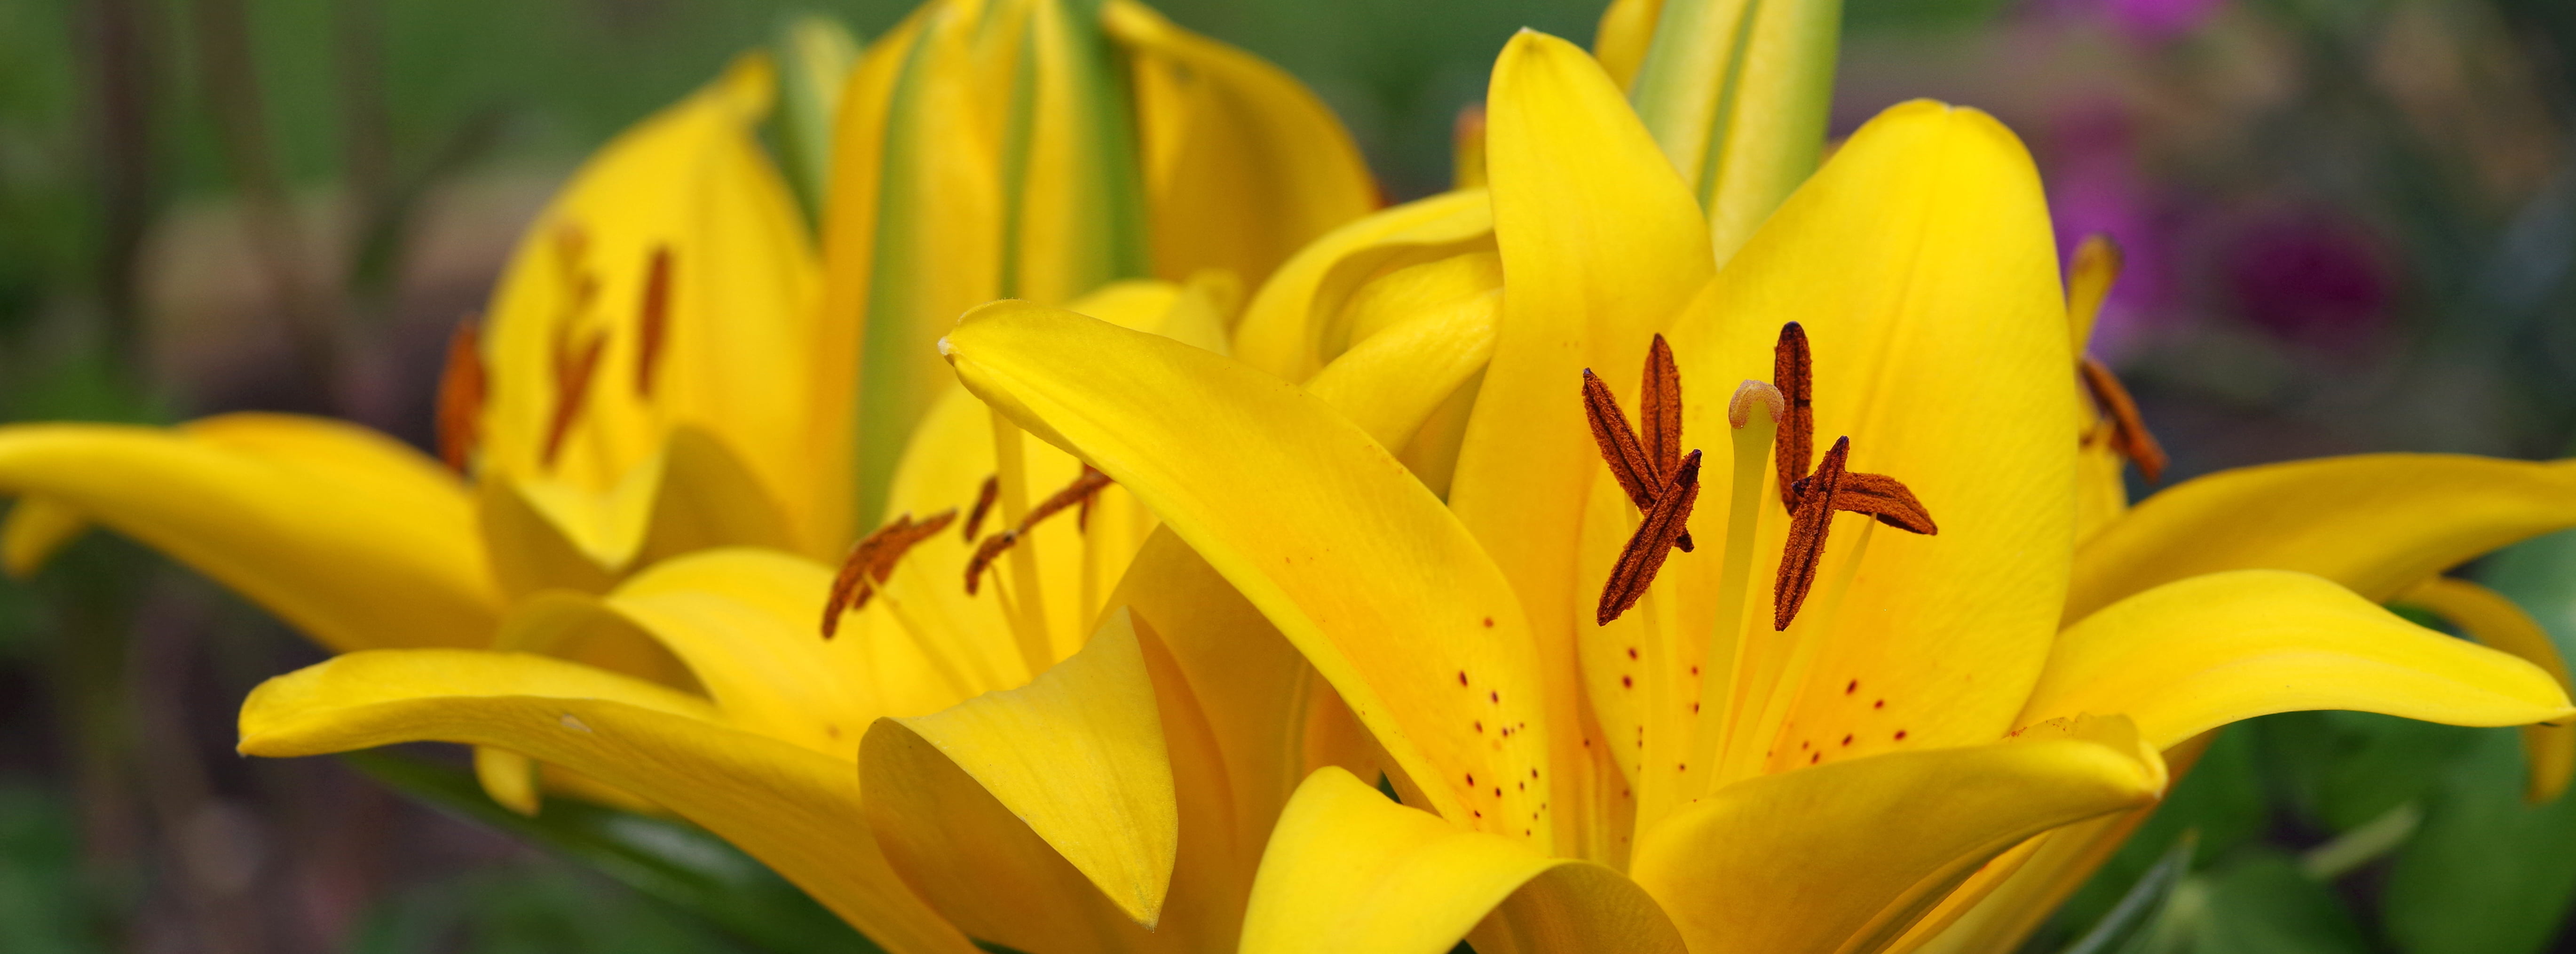 Lily Flower Facebook Cover - HD Wallpaper 